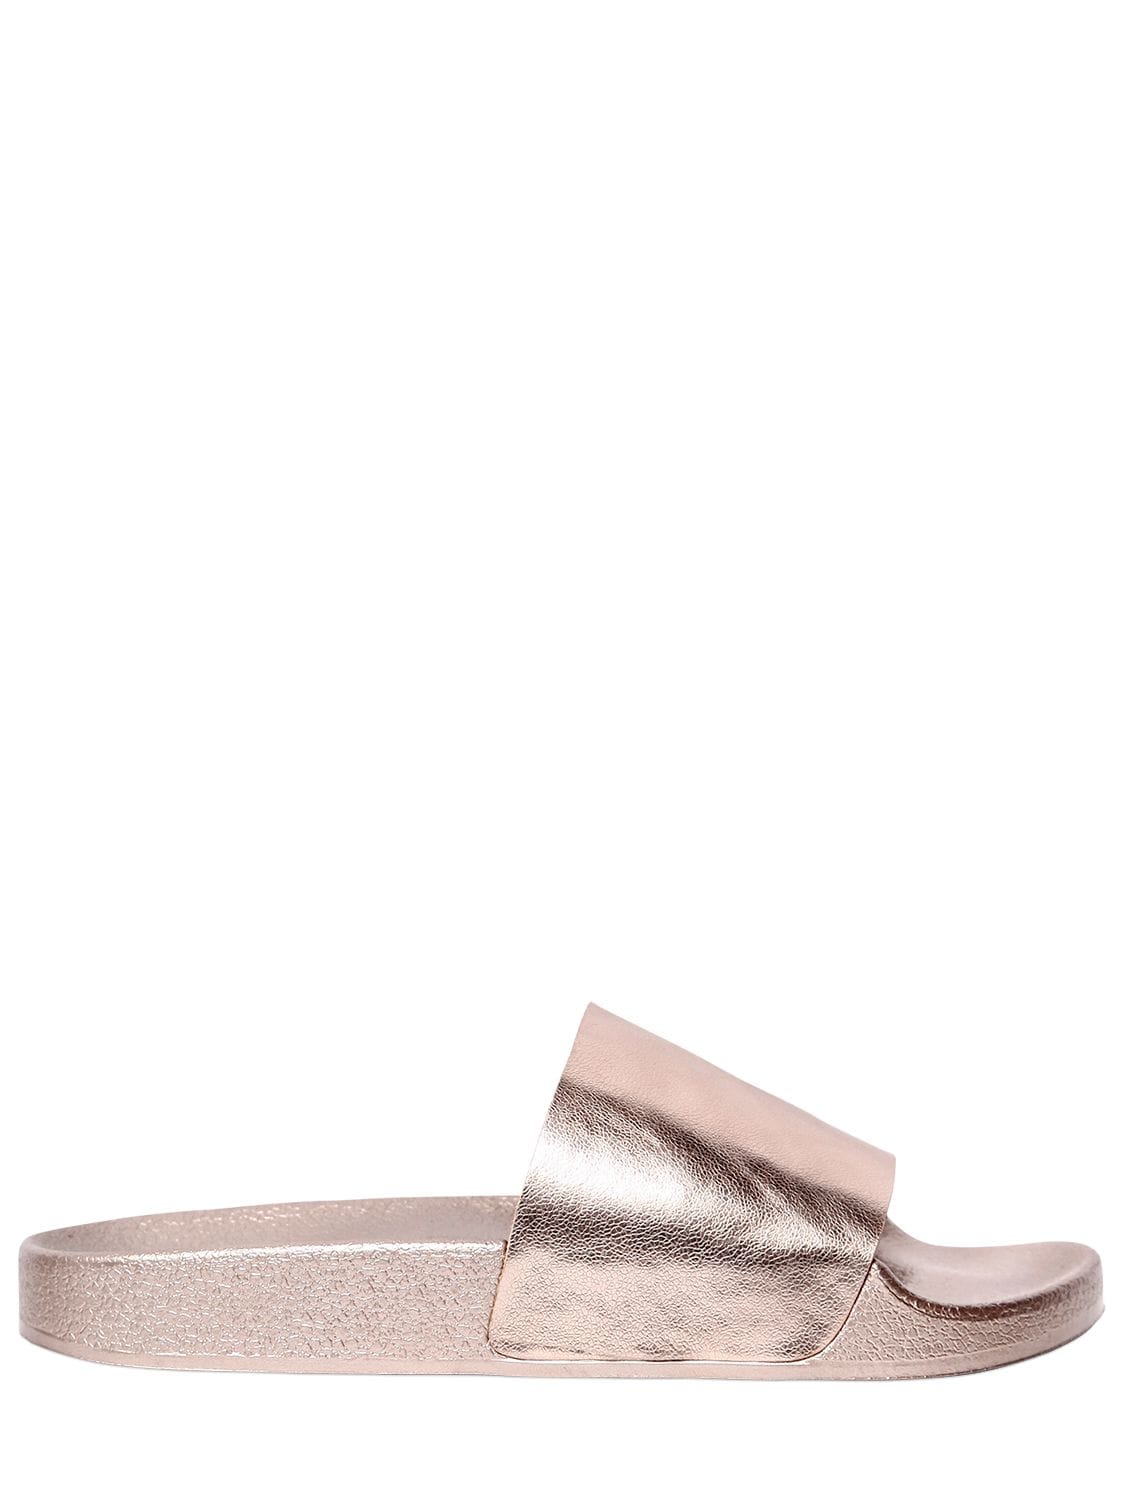 Windsor Smith 20mm Ines Faux Leather Slide Sandals In Rosegold